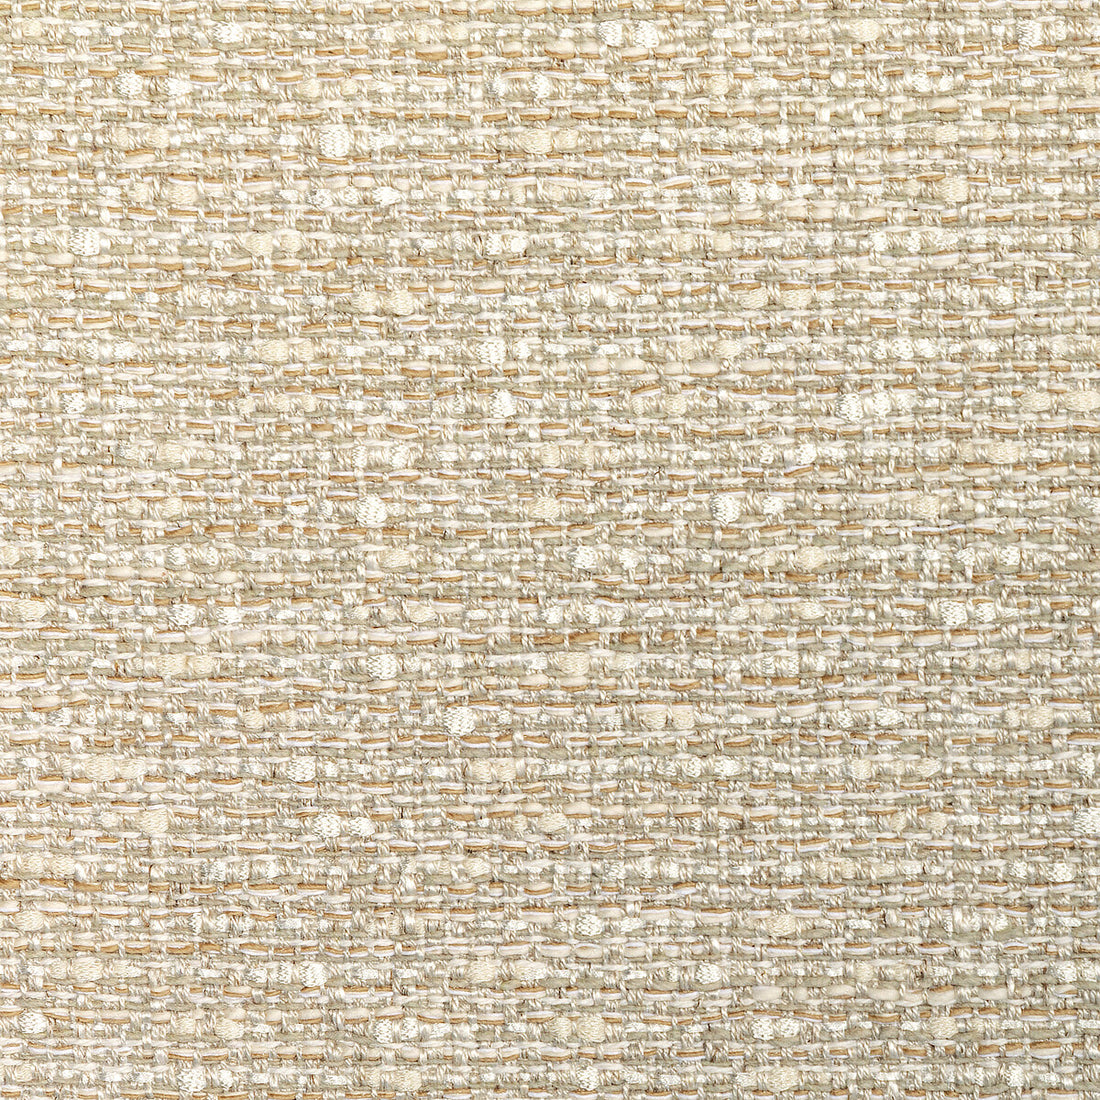 Naturalist fabric in white sand color - pattern 36104.16.0 - by Kravet Couture in the Luxury Textures II collection